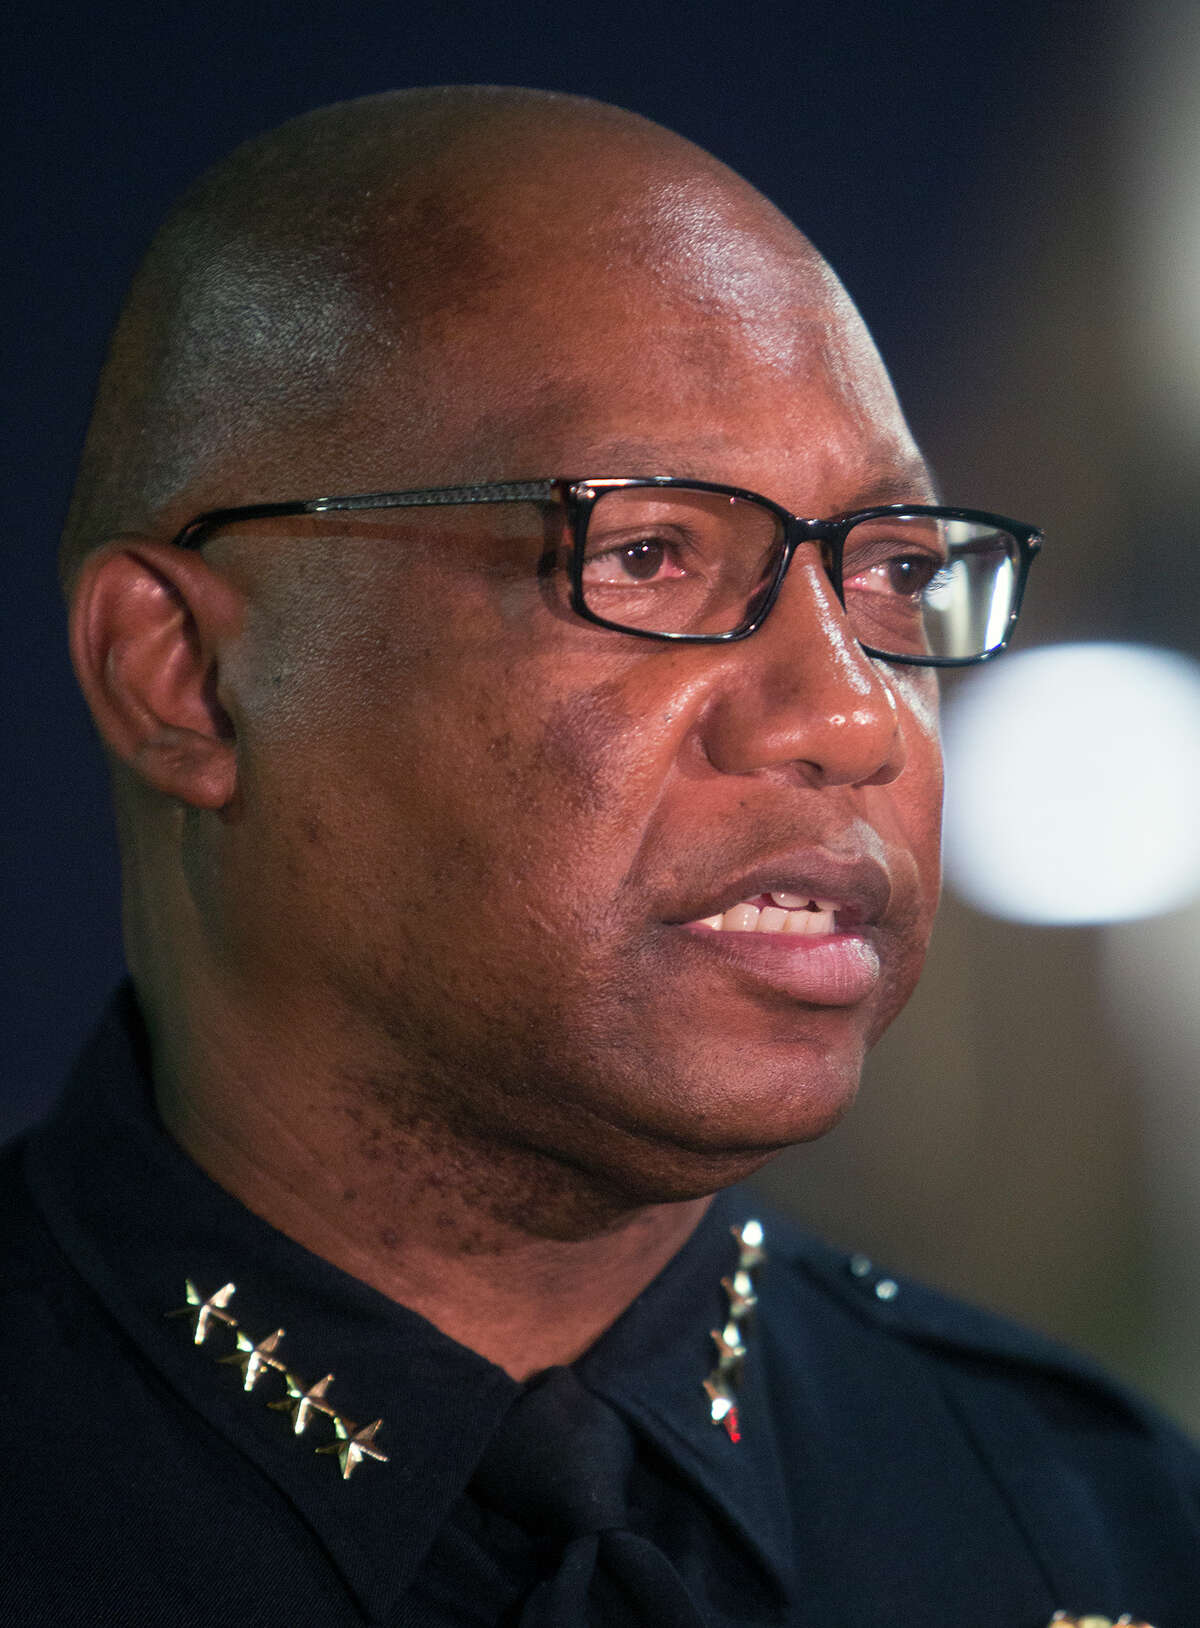 Houston Police Chief Charles McClelland addresses the media regarding the death of a police officer, Monday, May 18, 2015, in Houston. A driver fleeing from authorities struck and killed 47-year-old Richard Martin, who was placing spike strips on a road in the Memorial area, officials said. The driver of a carjacked minivan apparently intentionally rammed into Martin on Kirkwood near St. Mary's, just south of the Katy Freeway, the chief said. (Cody Duty / Houston Chronicle)